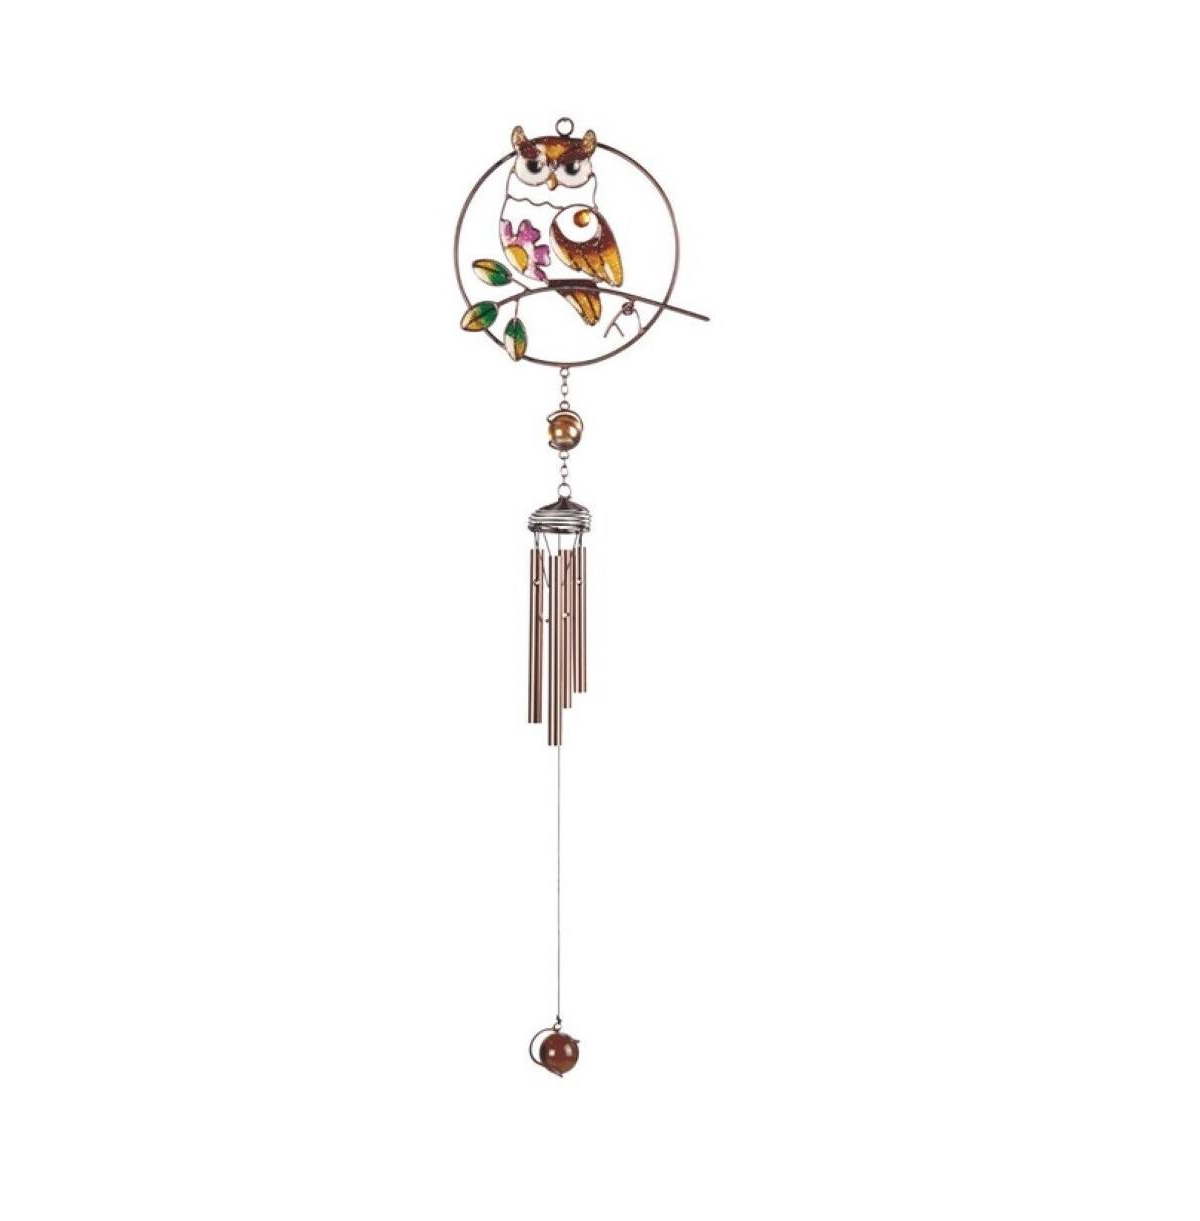 28" Long Owl Wind Chime with Gem Home Decor Perfect Gift for House Warming, Holidays and Birthdays - Multi